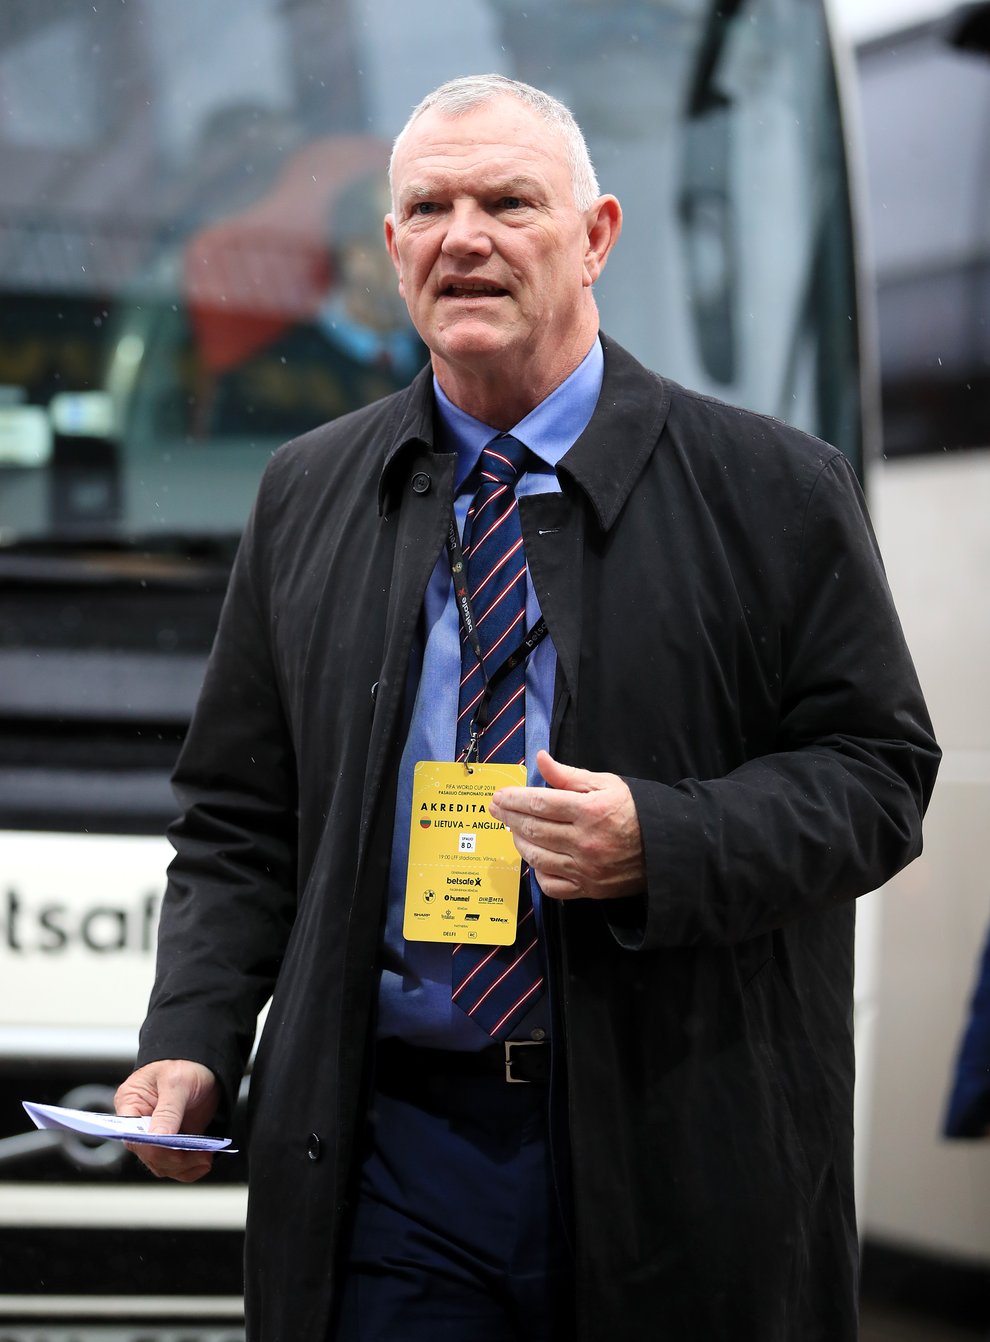 Greg Clarke has departed the FA after a series of inappropriate comments